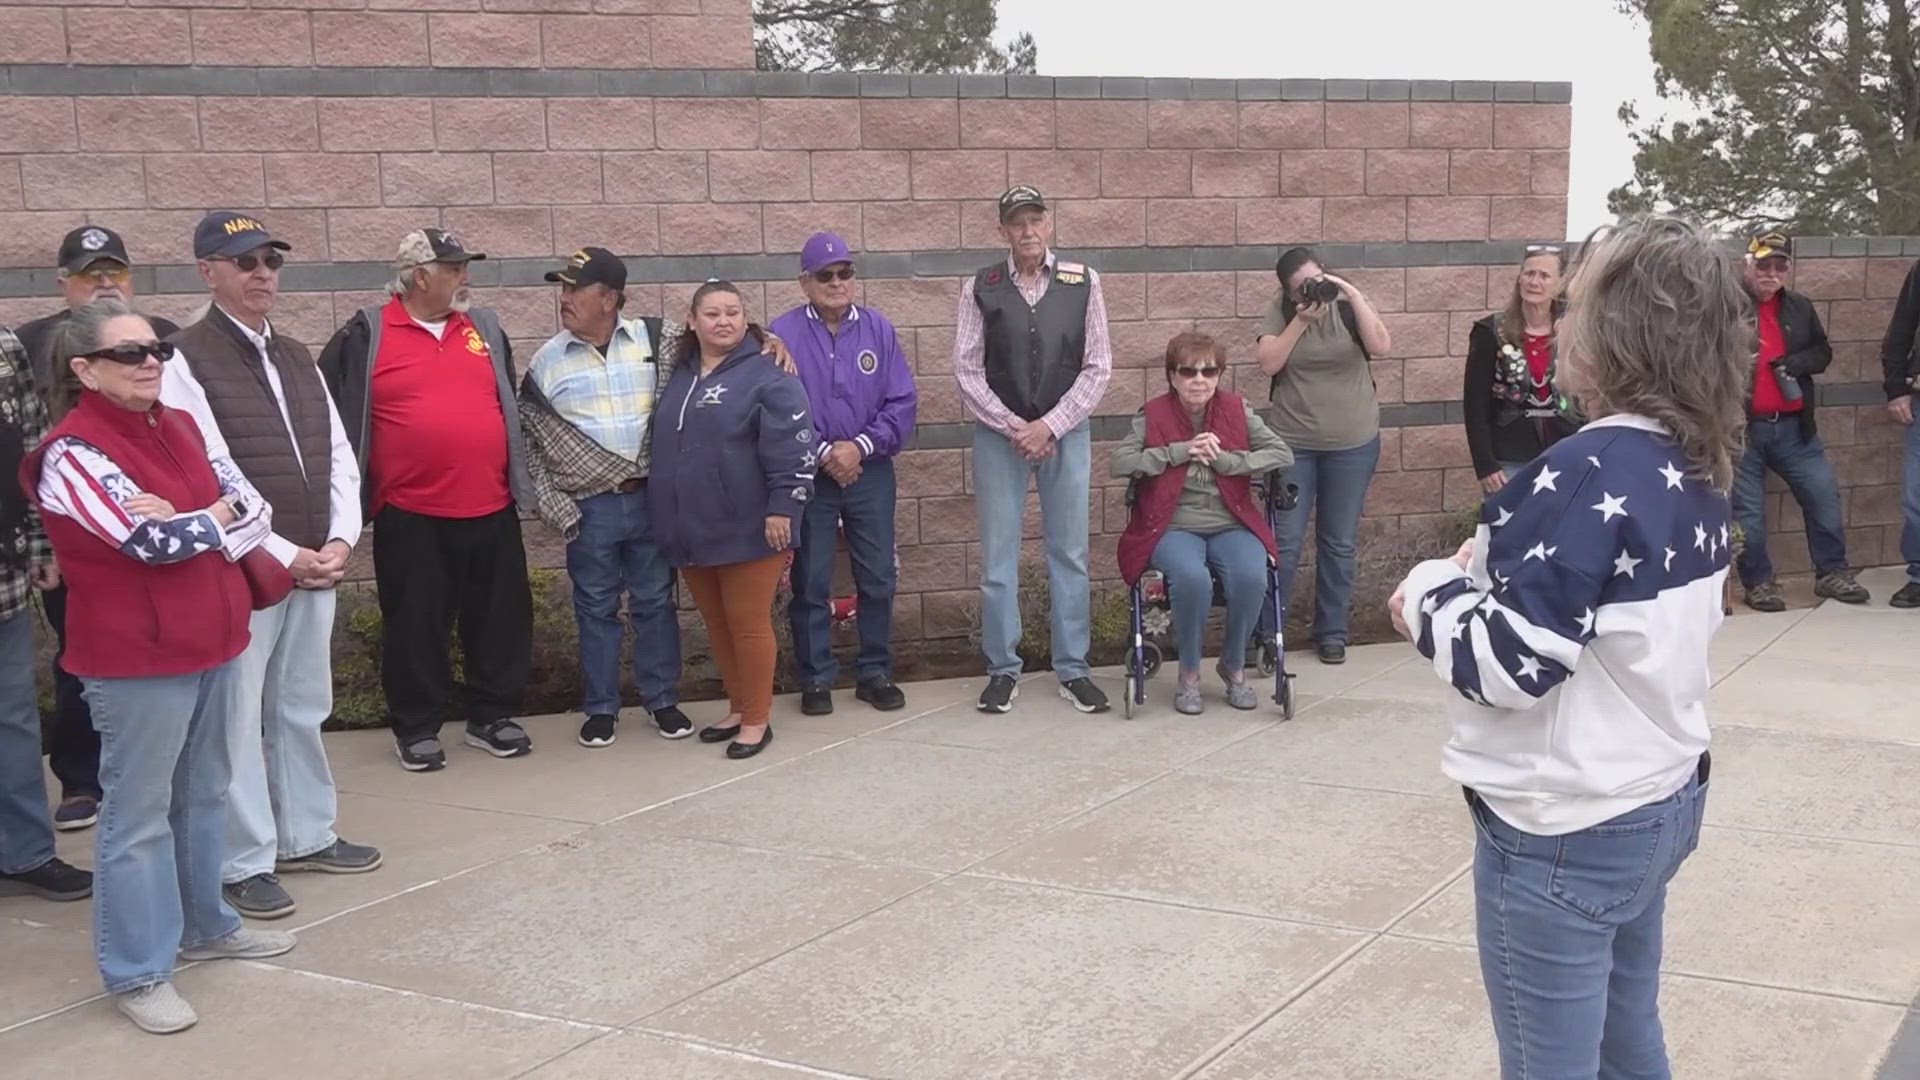 The ceremony honored U.S. Veterans who served in the Vietnam War from Nov. 1 to Apr. 10.